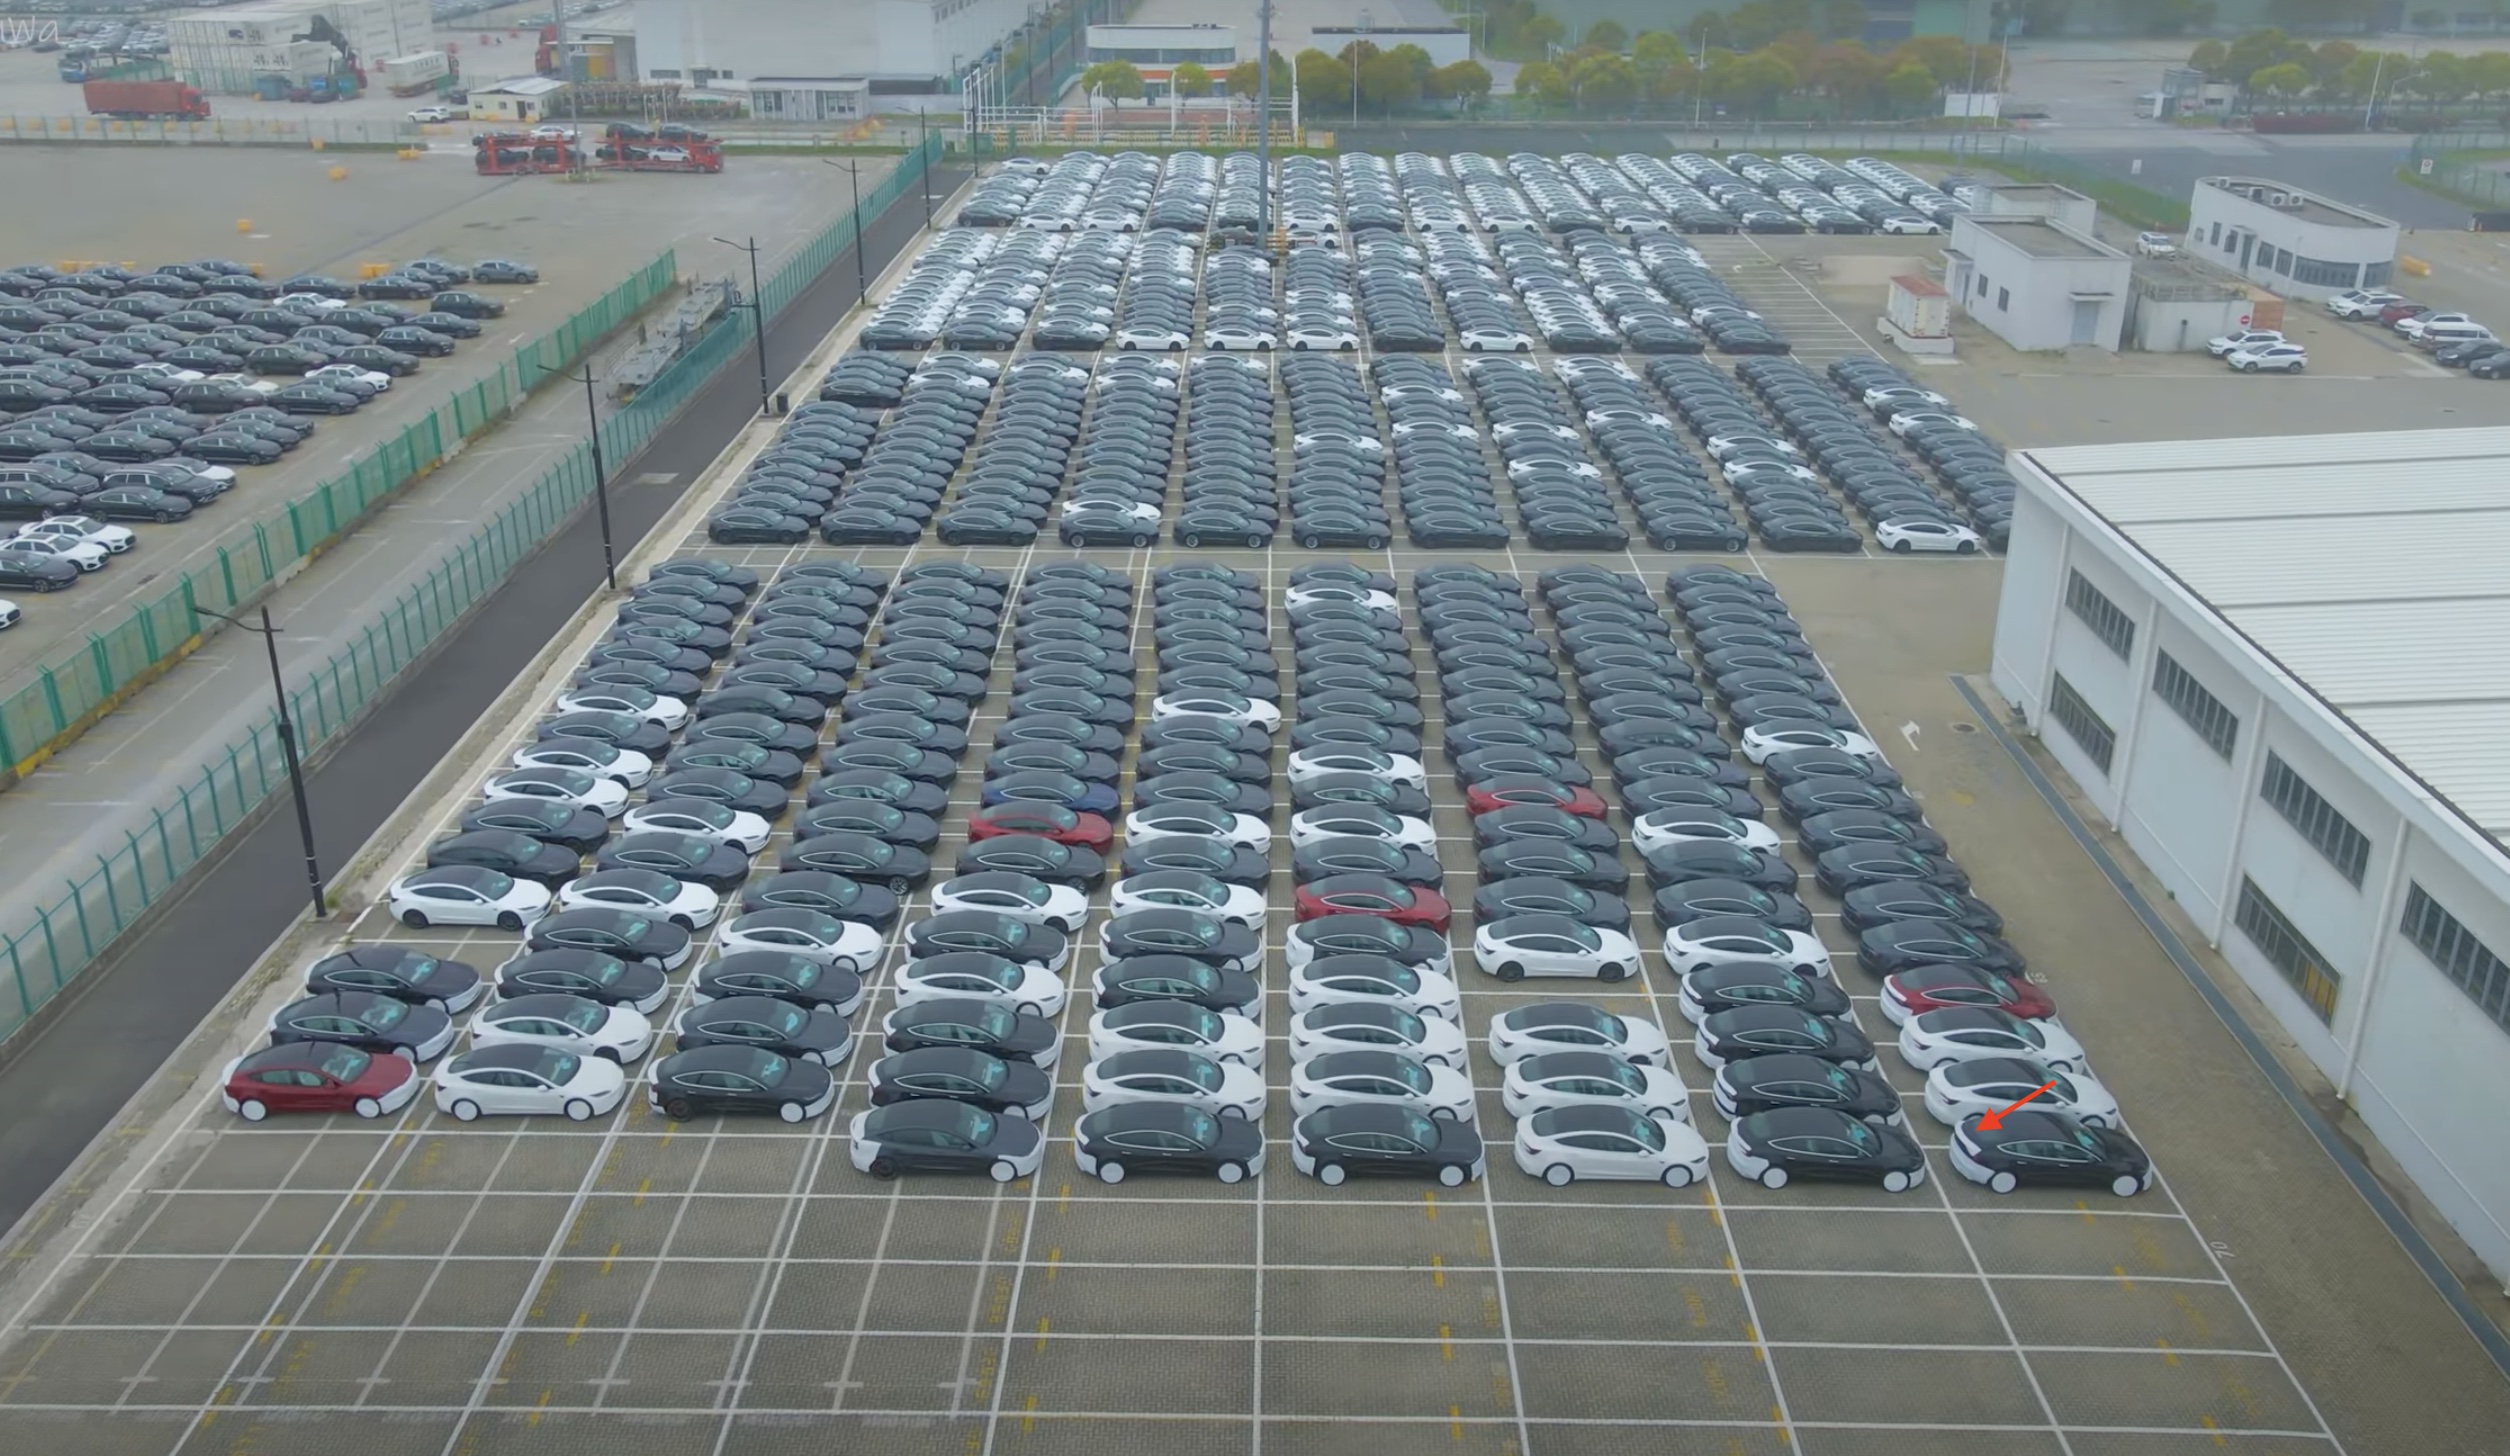 Apparent Tesla Model 3 “Ludicrous” fleet spotted at Shanghai Southport Terminal